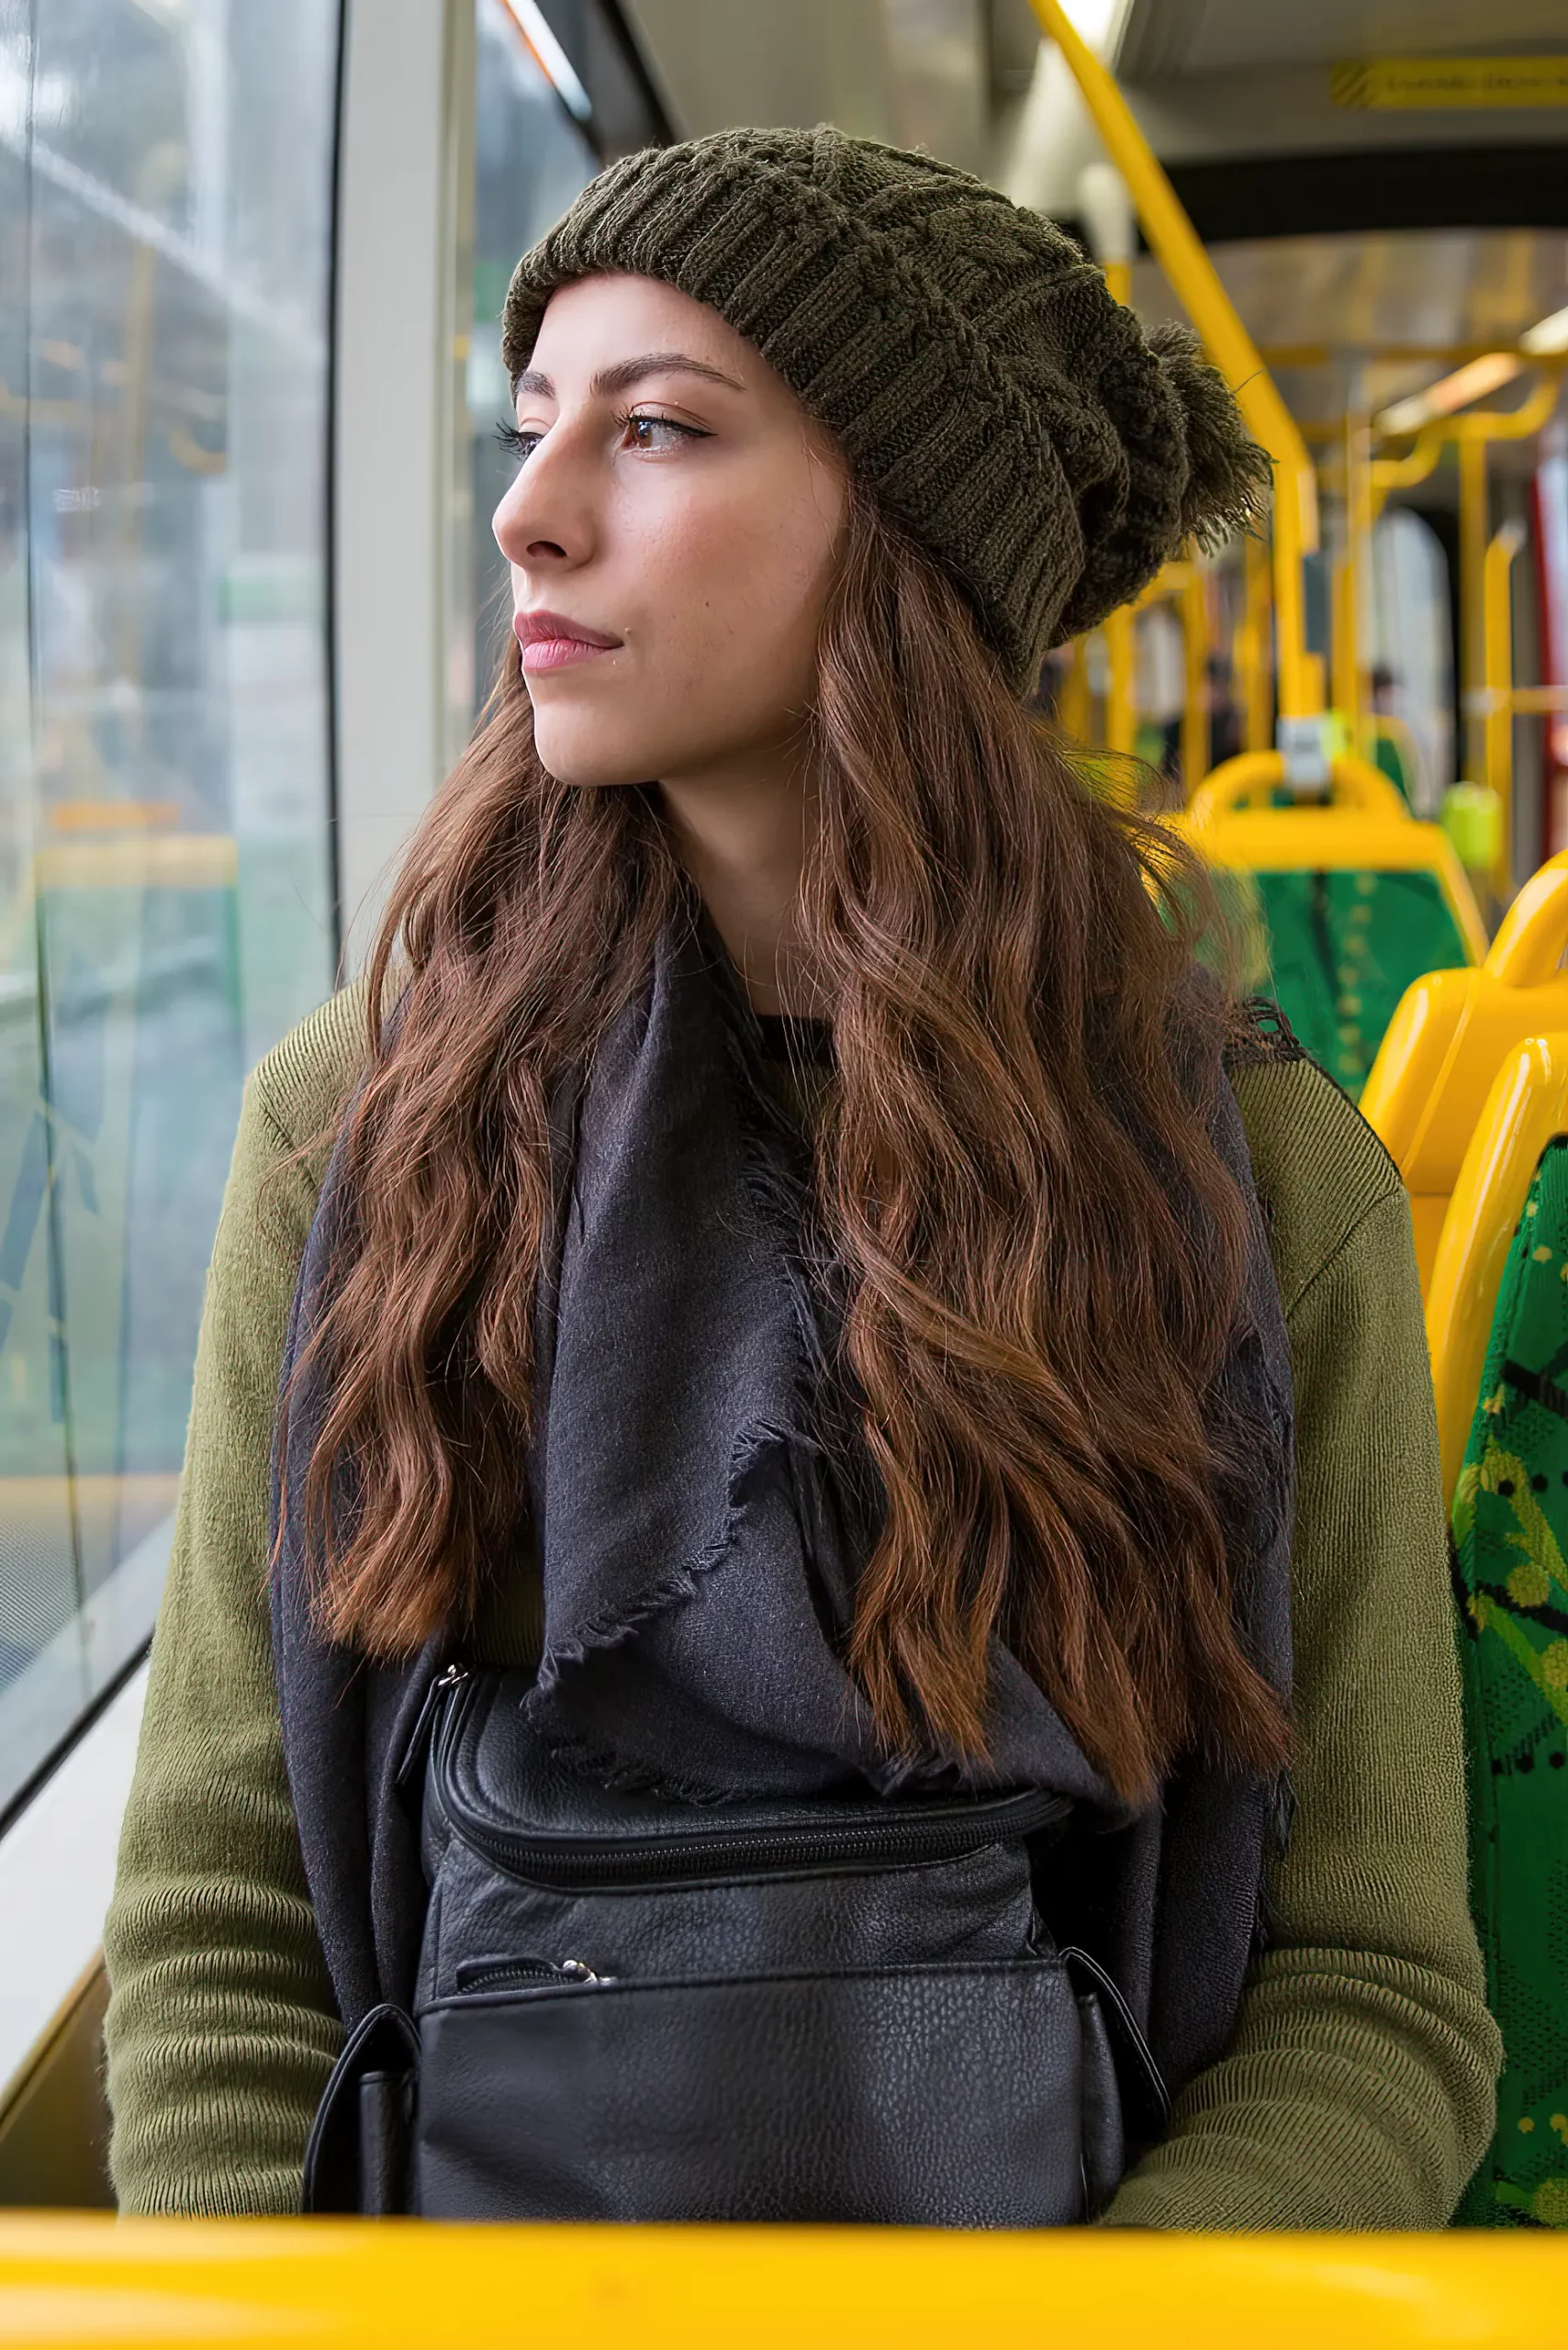 Young woman sitting alone on melbourne tram wearing a green beanie